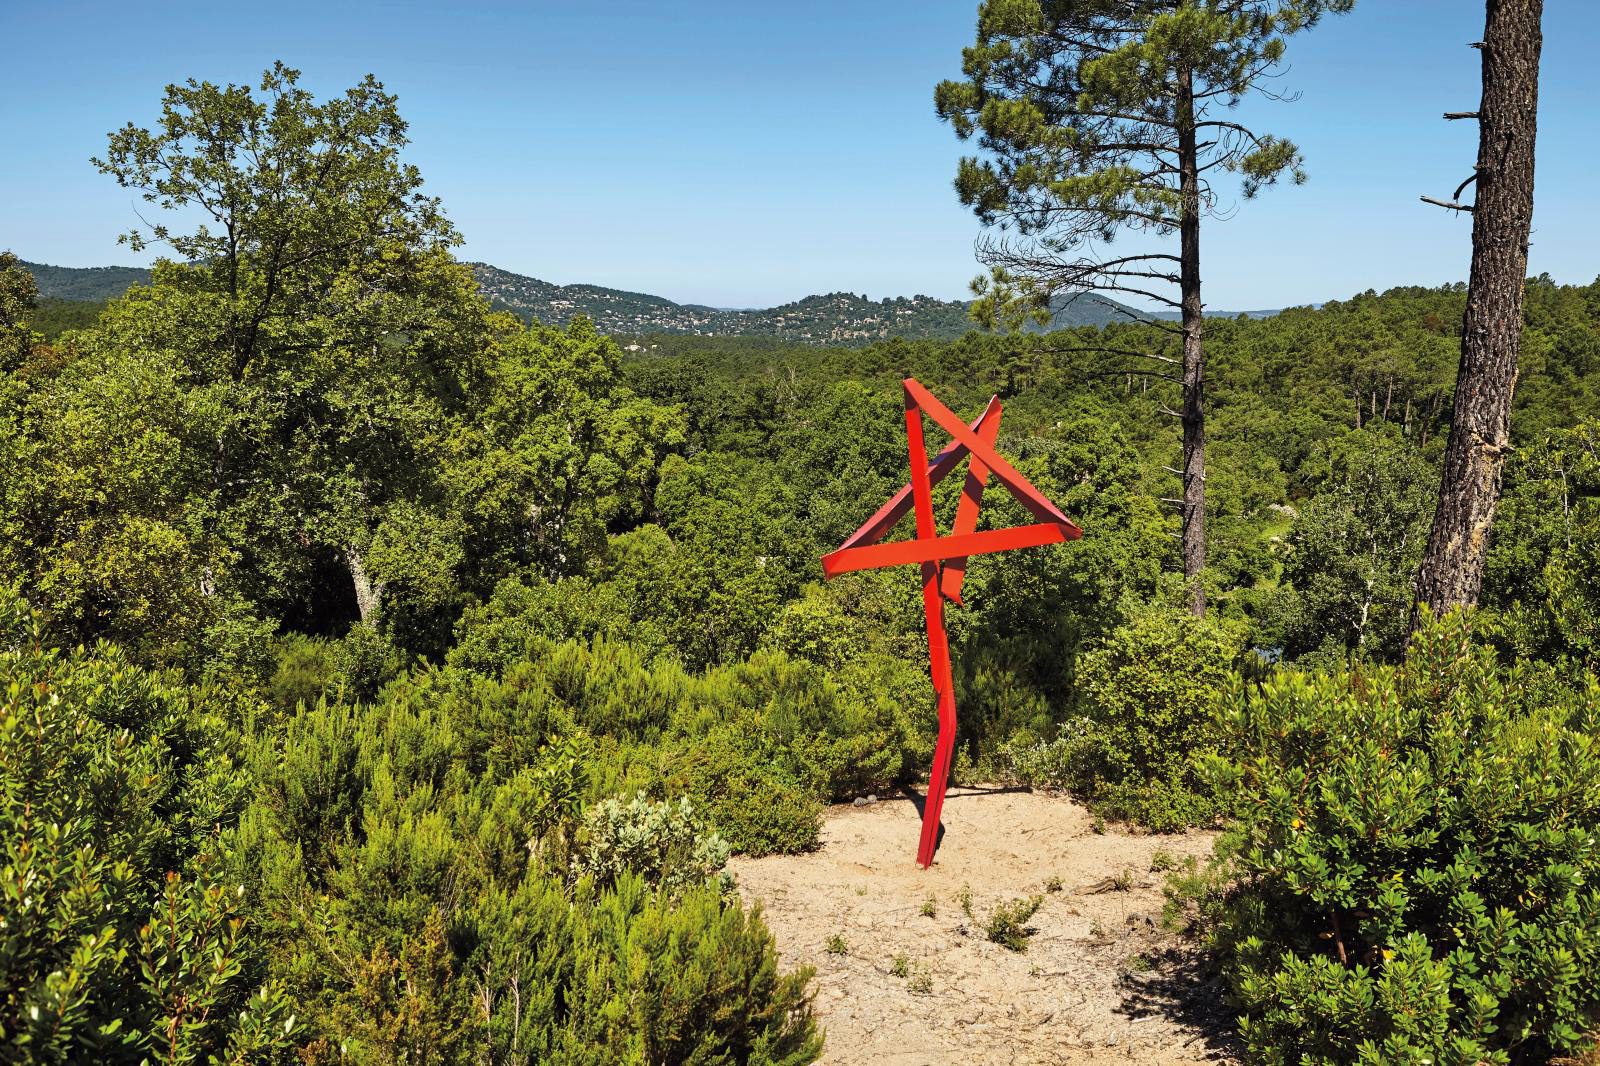 Red on Red, 2017, painted aluminum, unique work, 345 x 165 x 120 cm/135.8 x 65 x 47.2 in. Domaine du Muy, Galerie Mitterrand.Photo J.C. Le